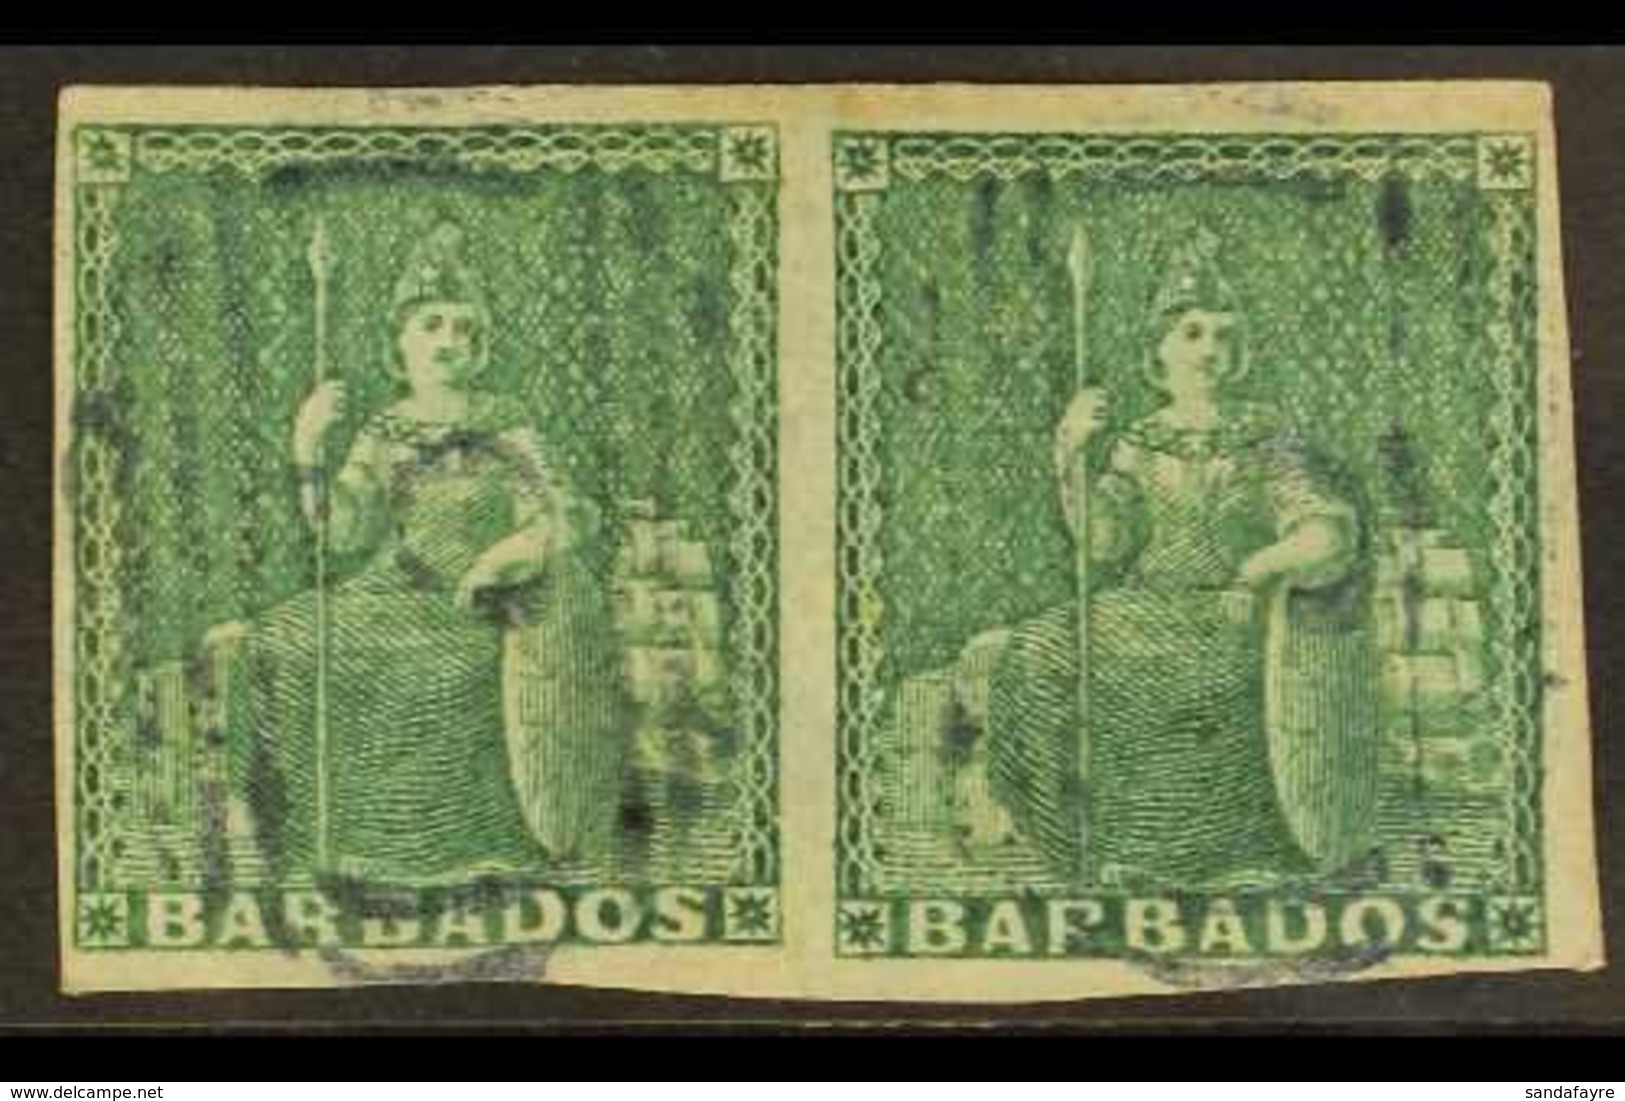 1852 (½d) Deep Green On Blued Paper, Britannia, SG 2, Very Fine Used Pair With Good To Large Margins All Round And Light - Barbades (...-1966)